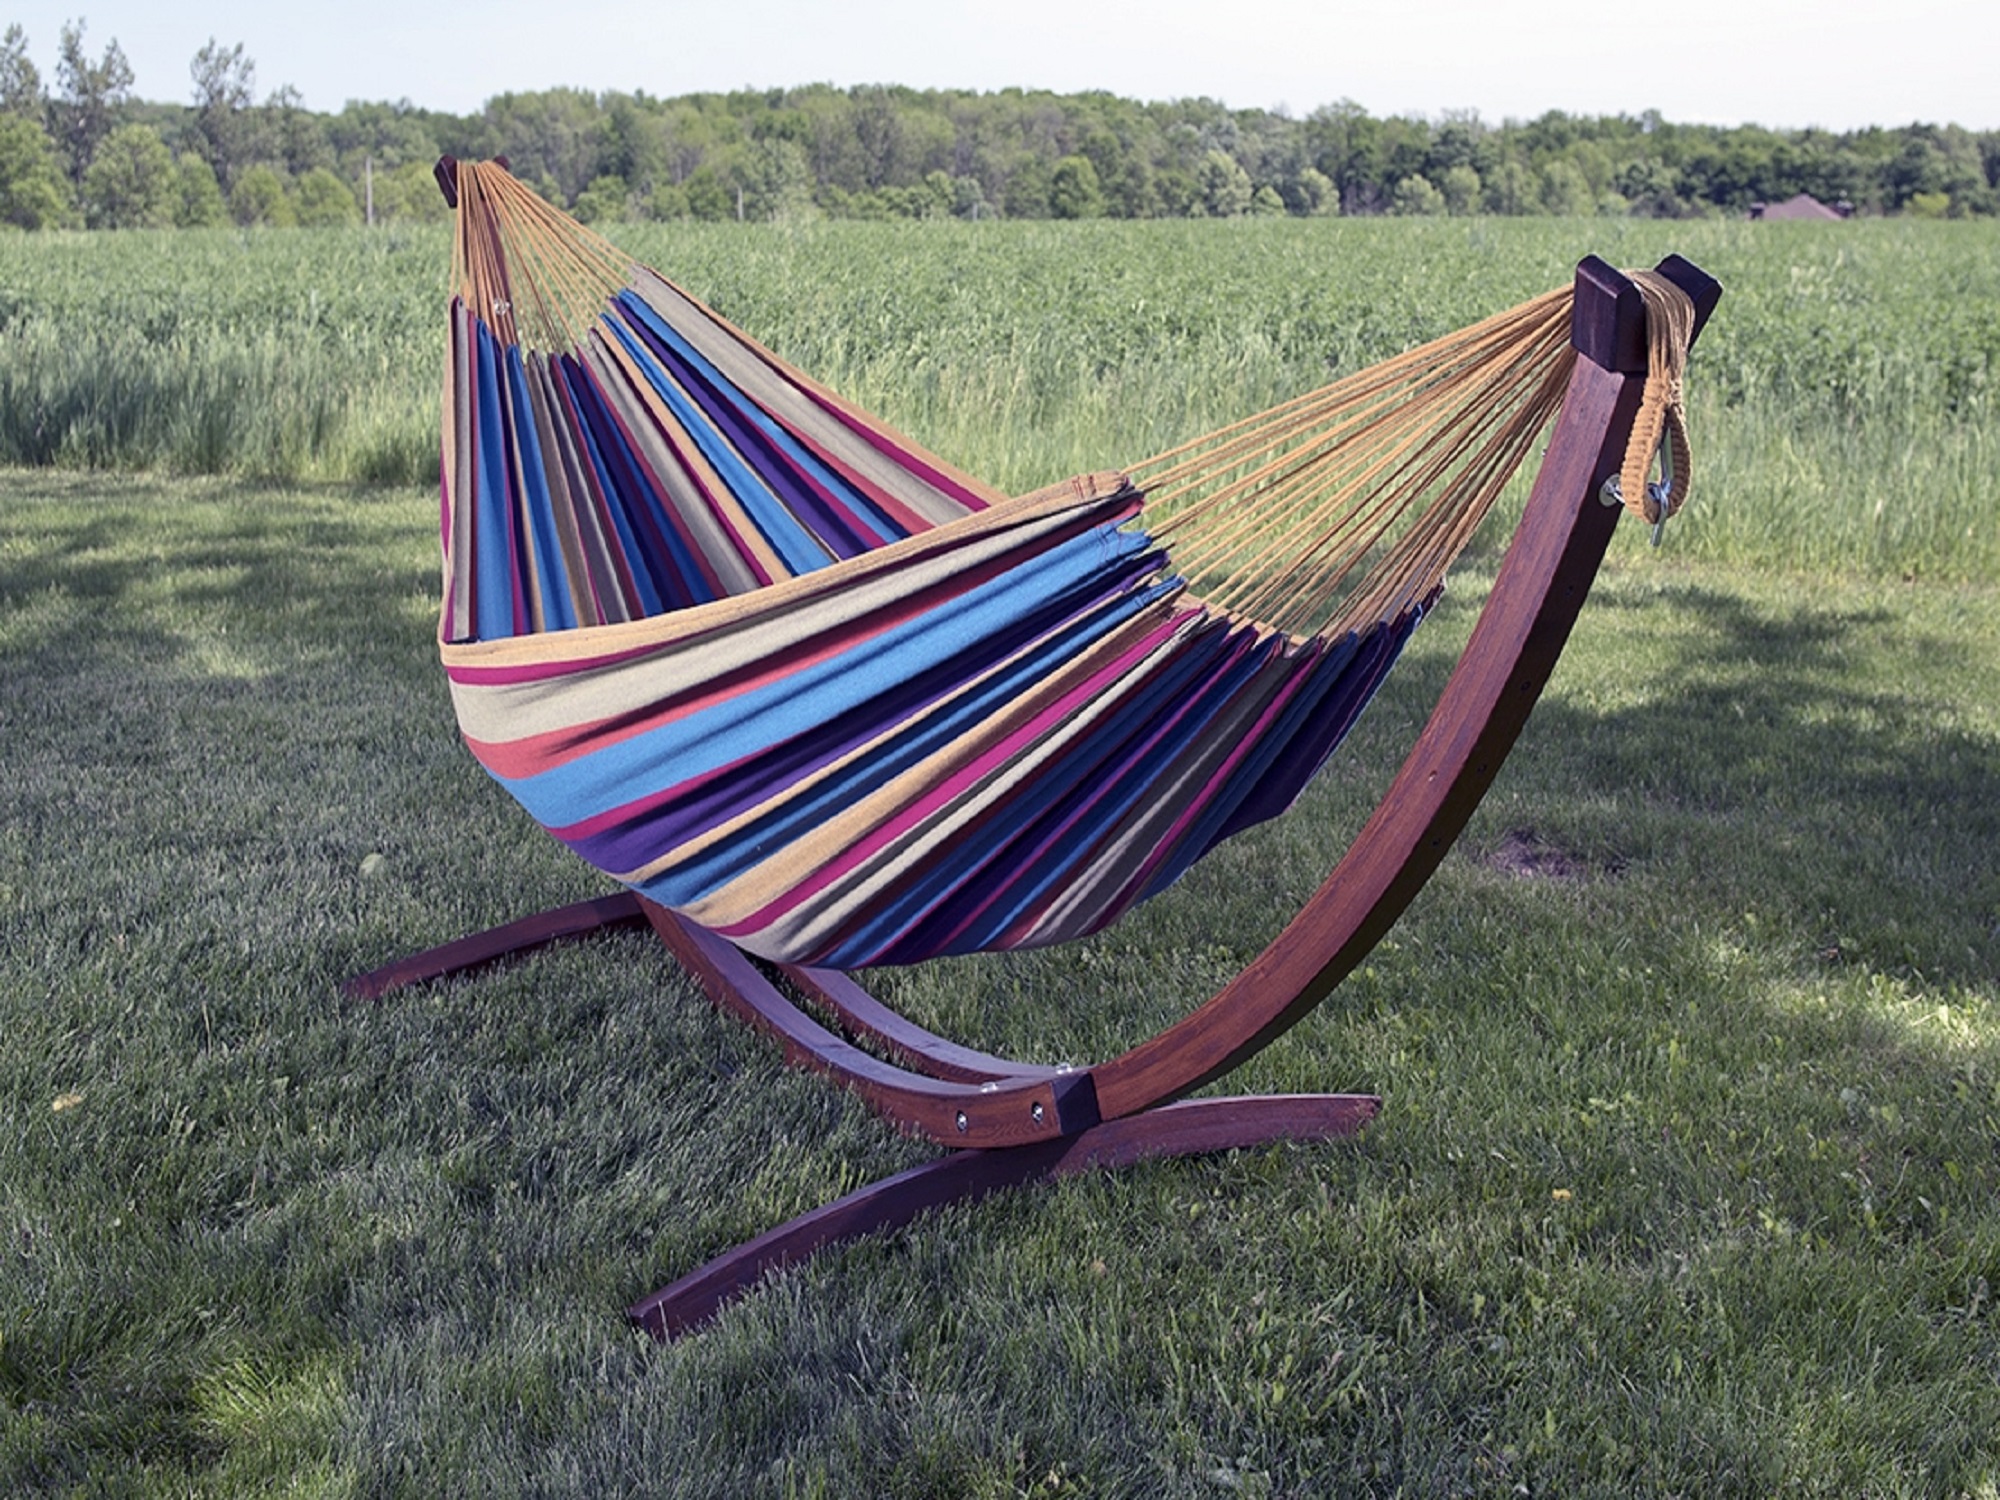 The Hamptons Collection 102” Yellow and Purple Striped Brazilian Style Hammock with Stand